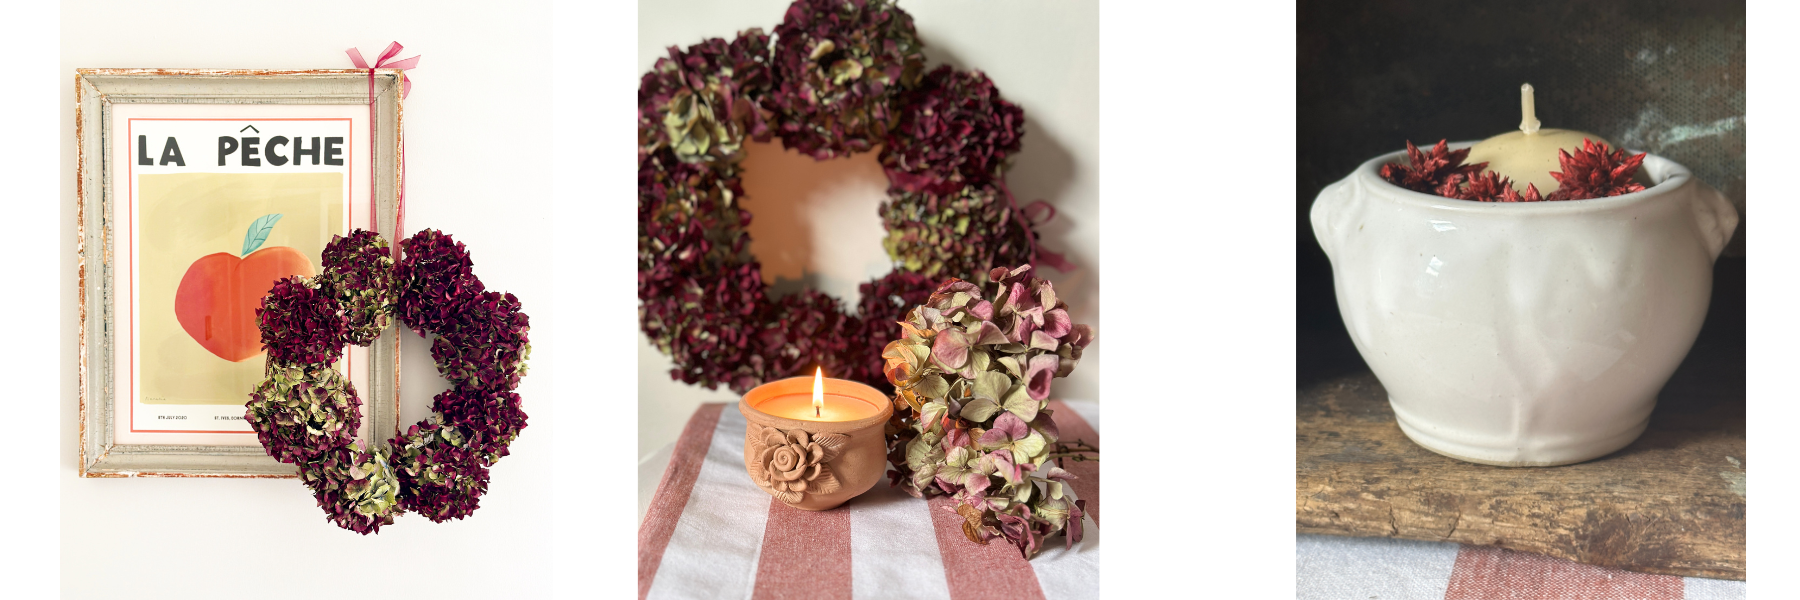 3 Thoughtful and Sustainable Ways to Decorate Your Home for the Christmas Holidays